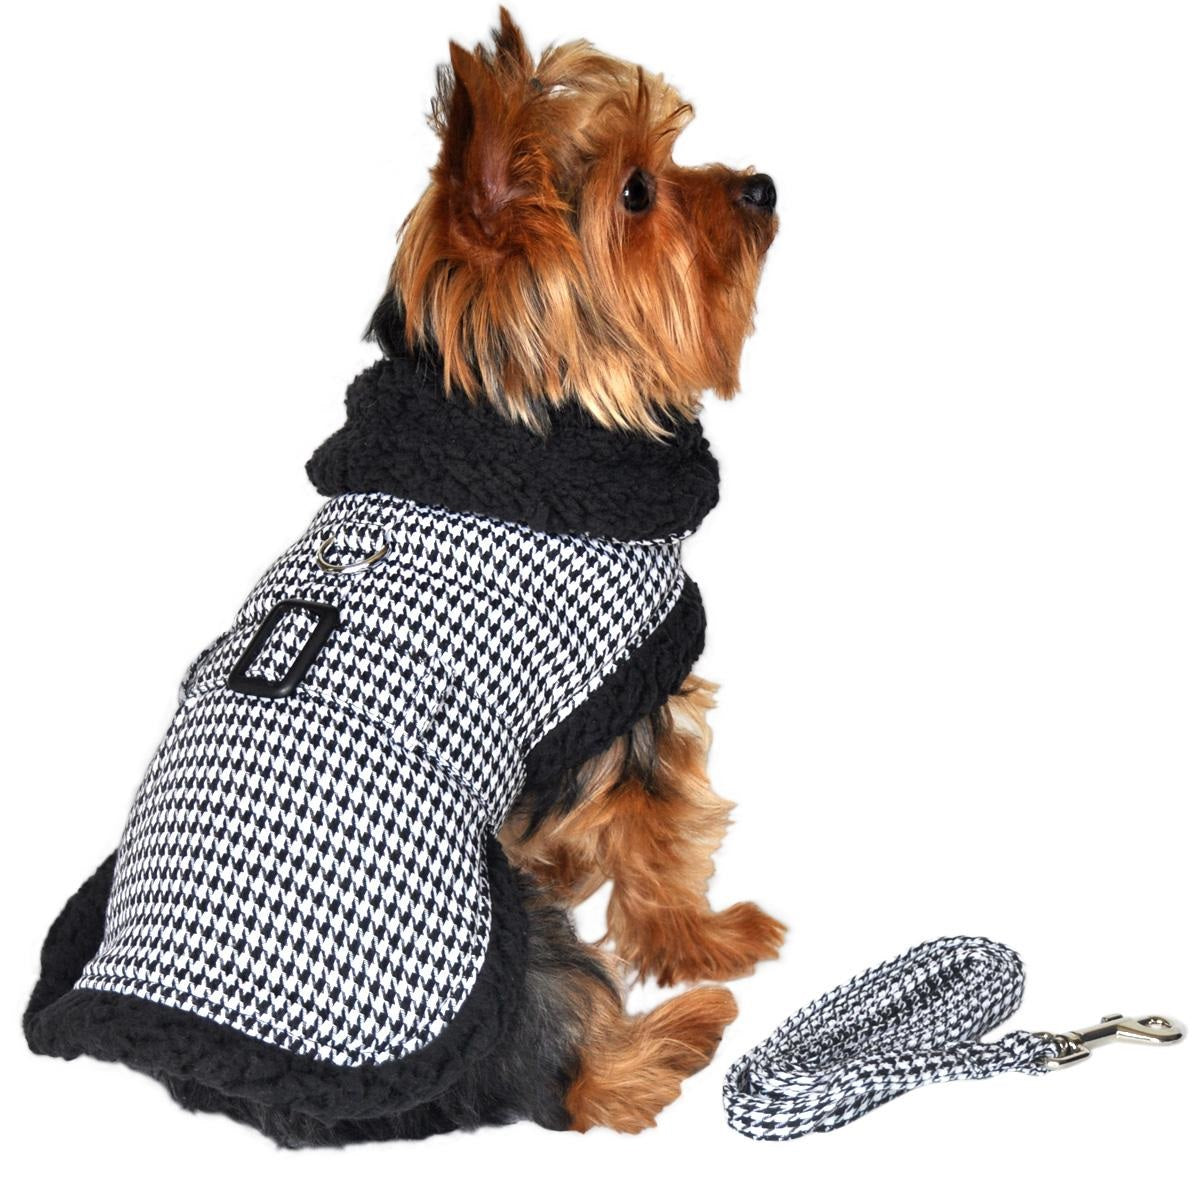 Sherpa Line Dog Harness Coat - Black and White Houndstooth with Matching Leash